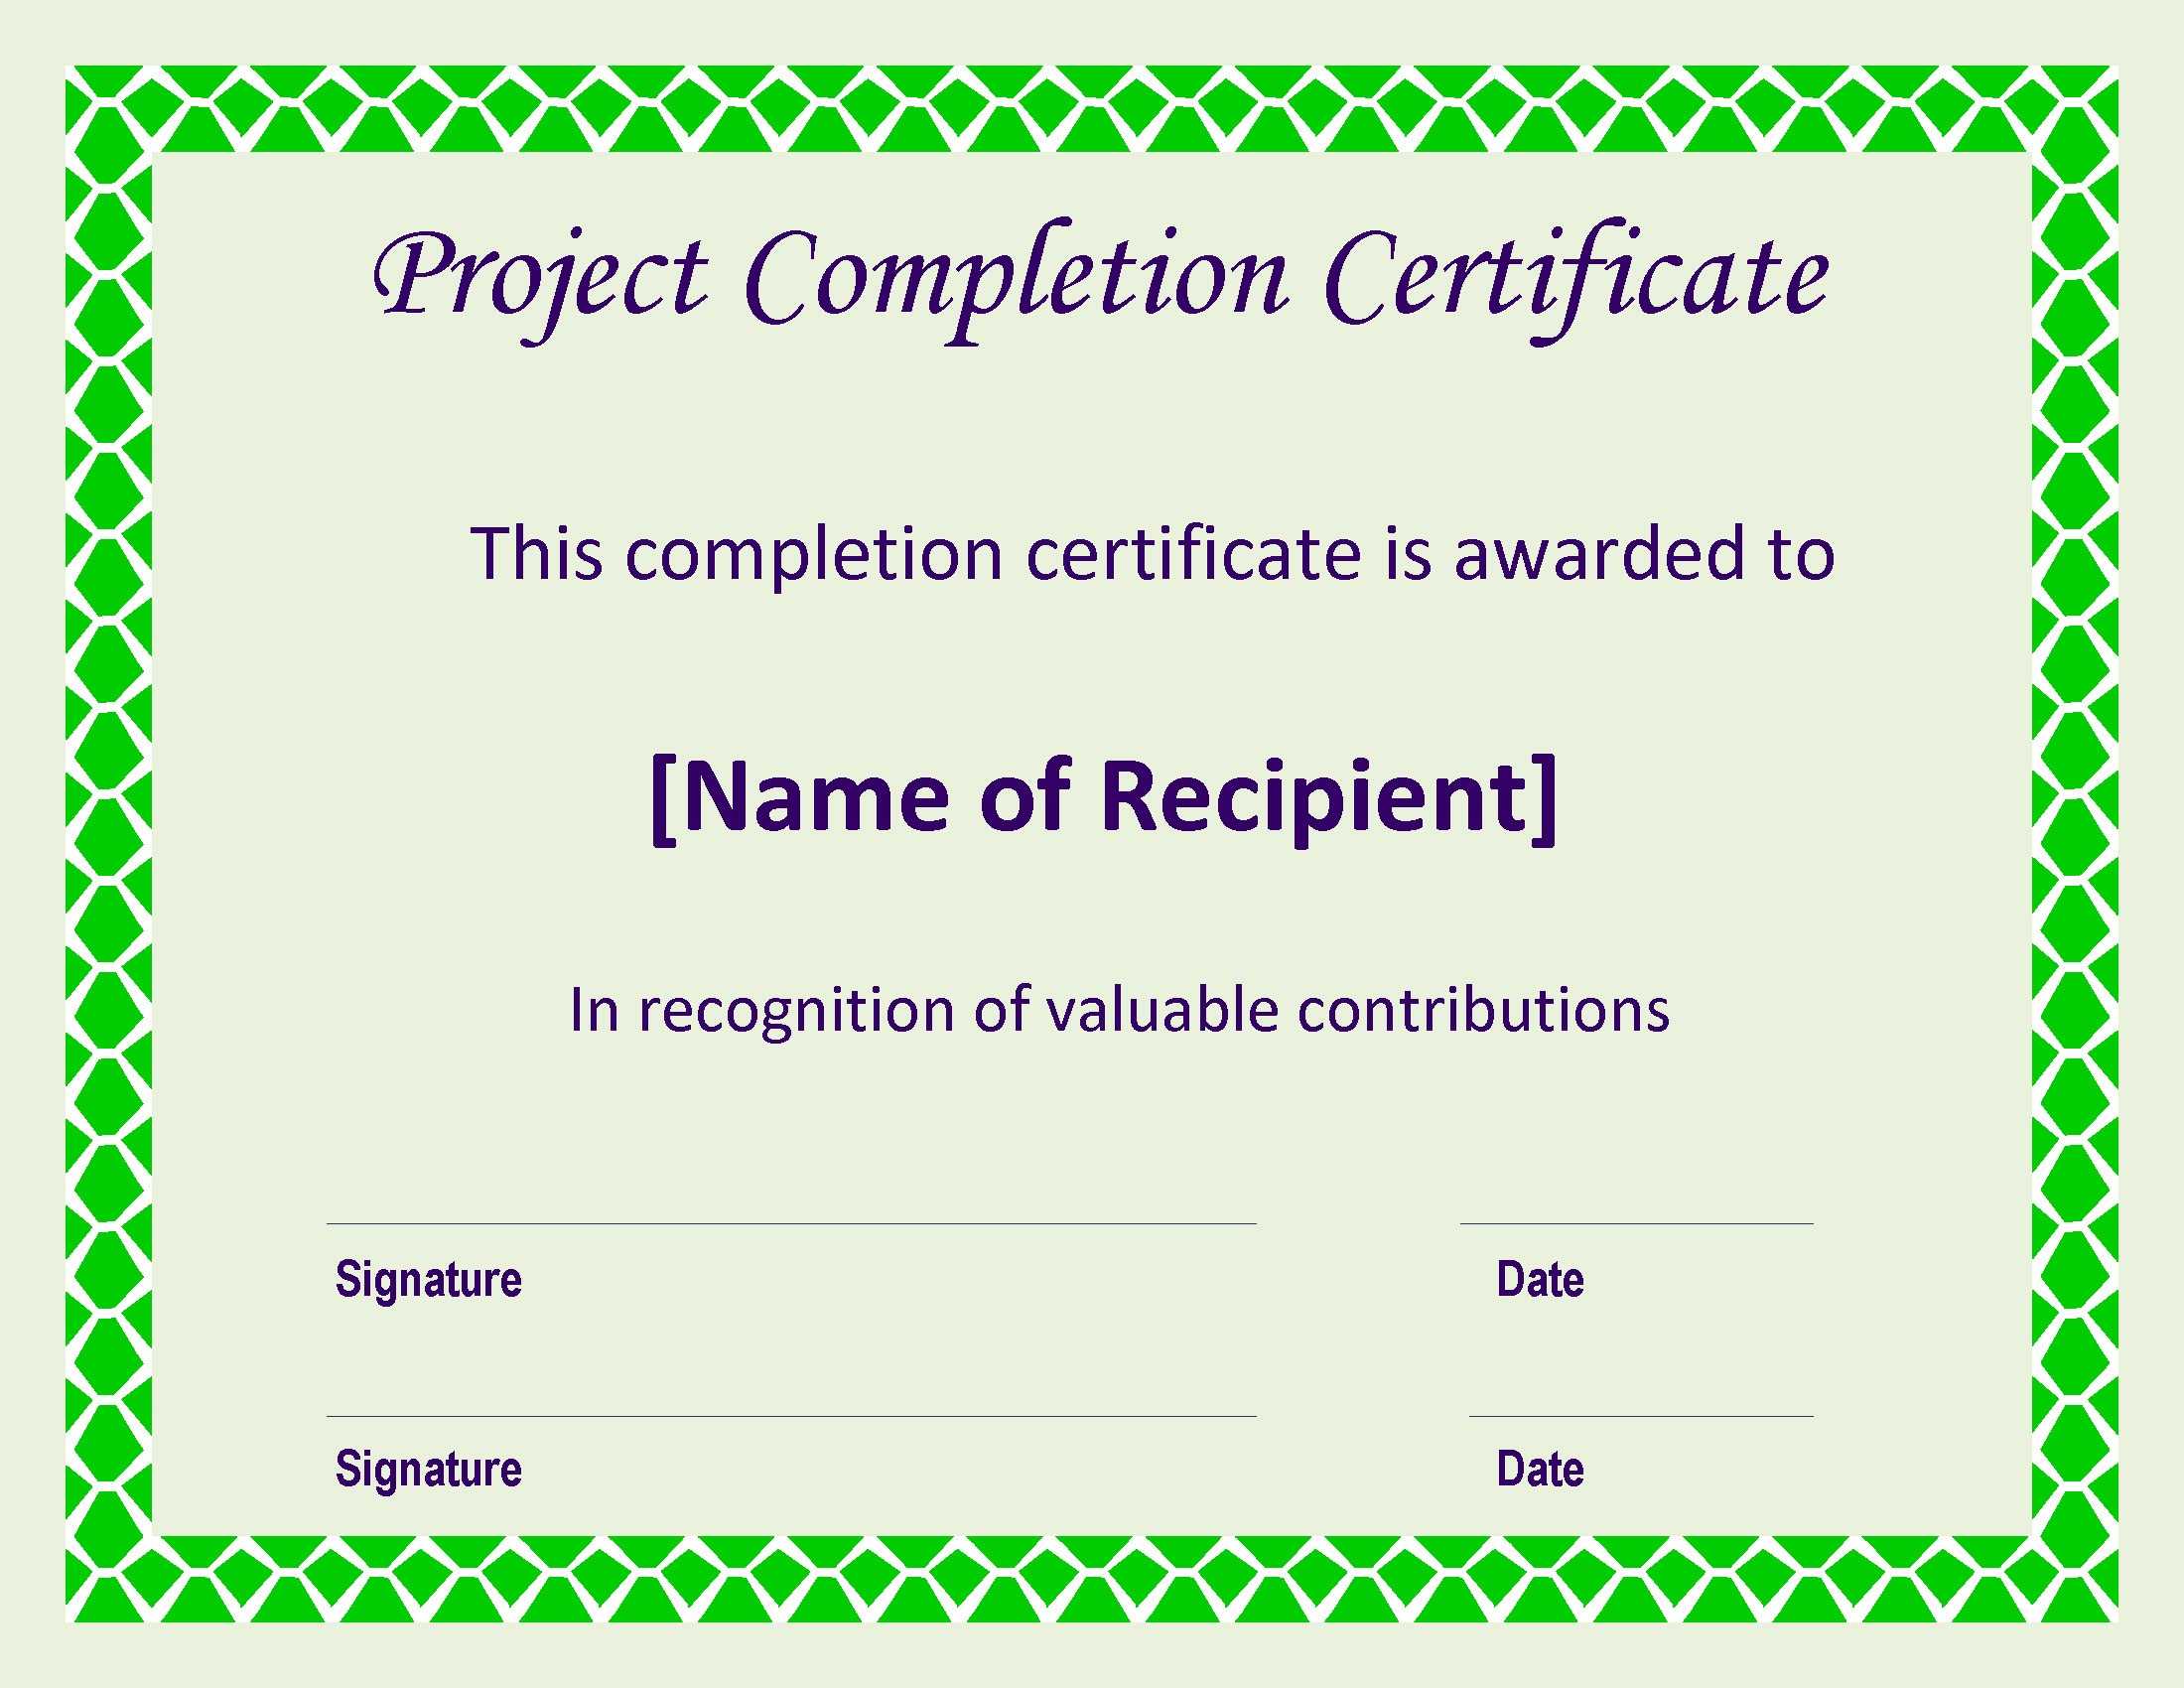 Certificate Sample For Project - Calep.midnightpig.co Inside Certificate Template For Project Completion